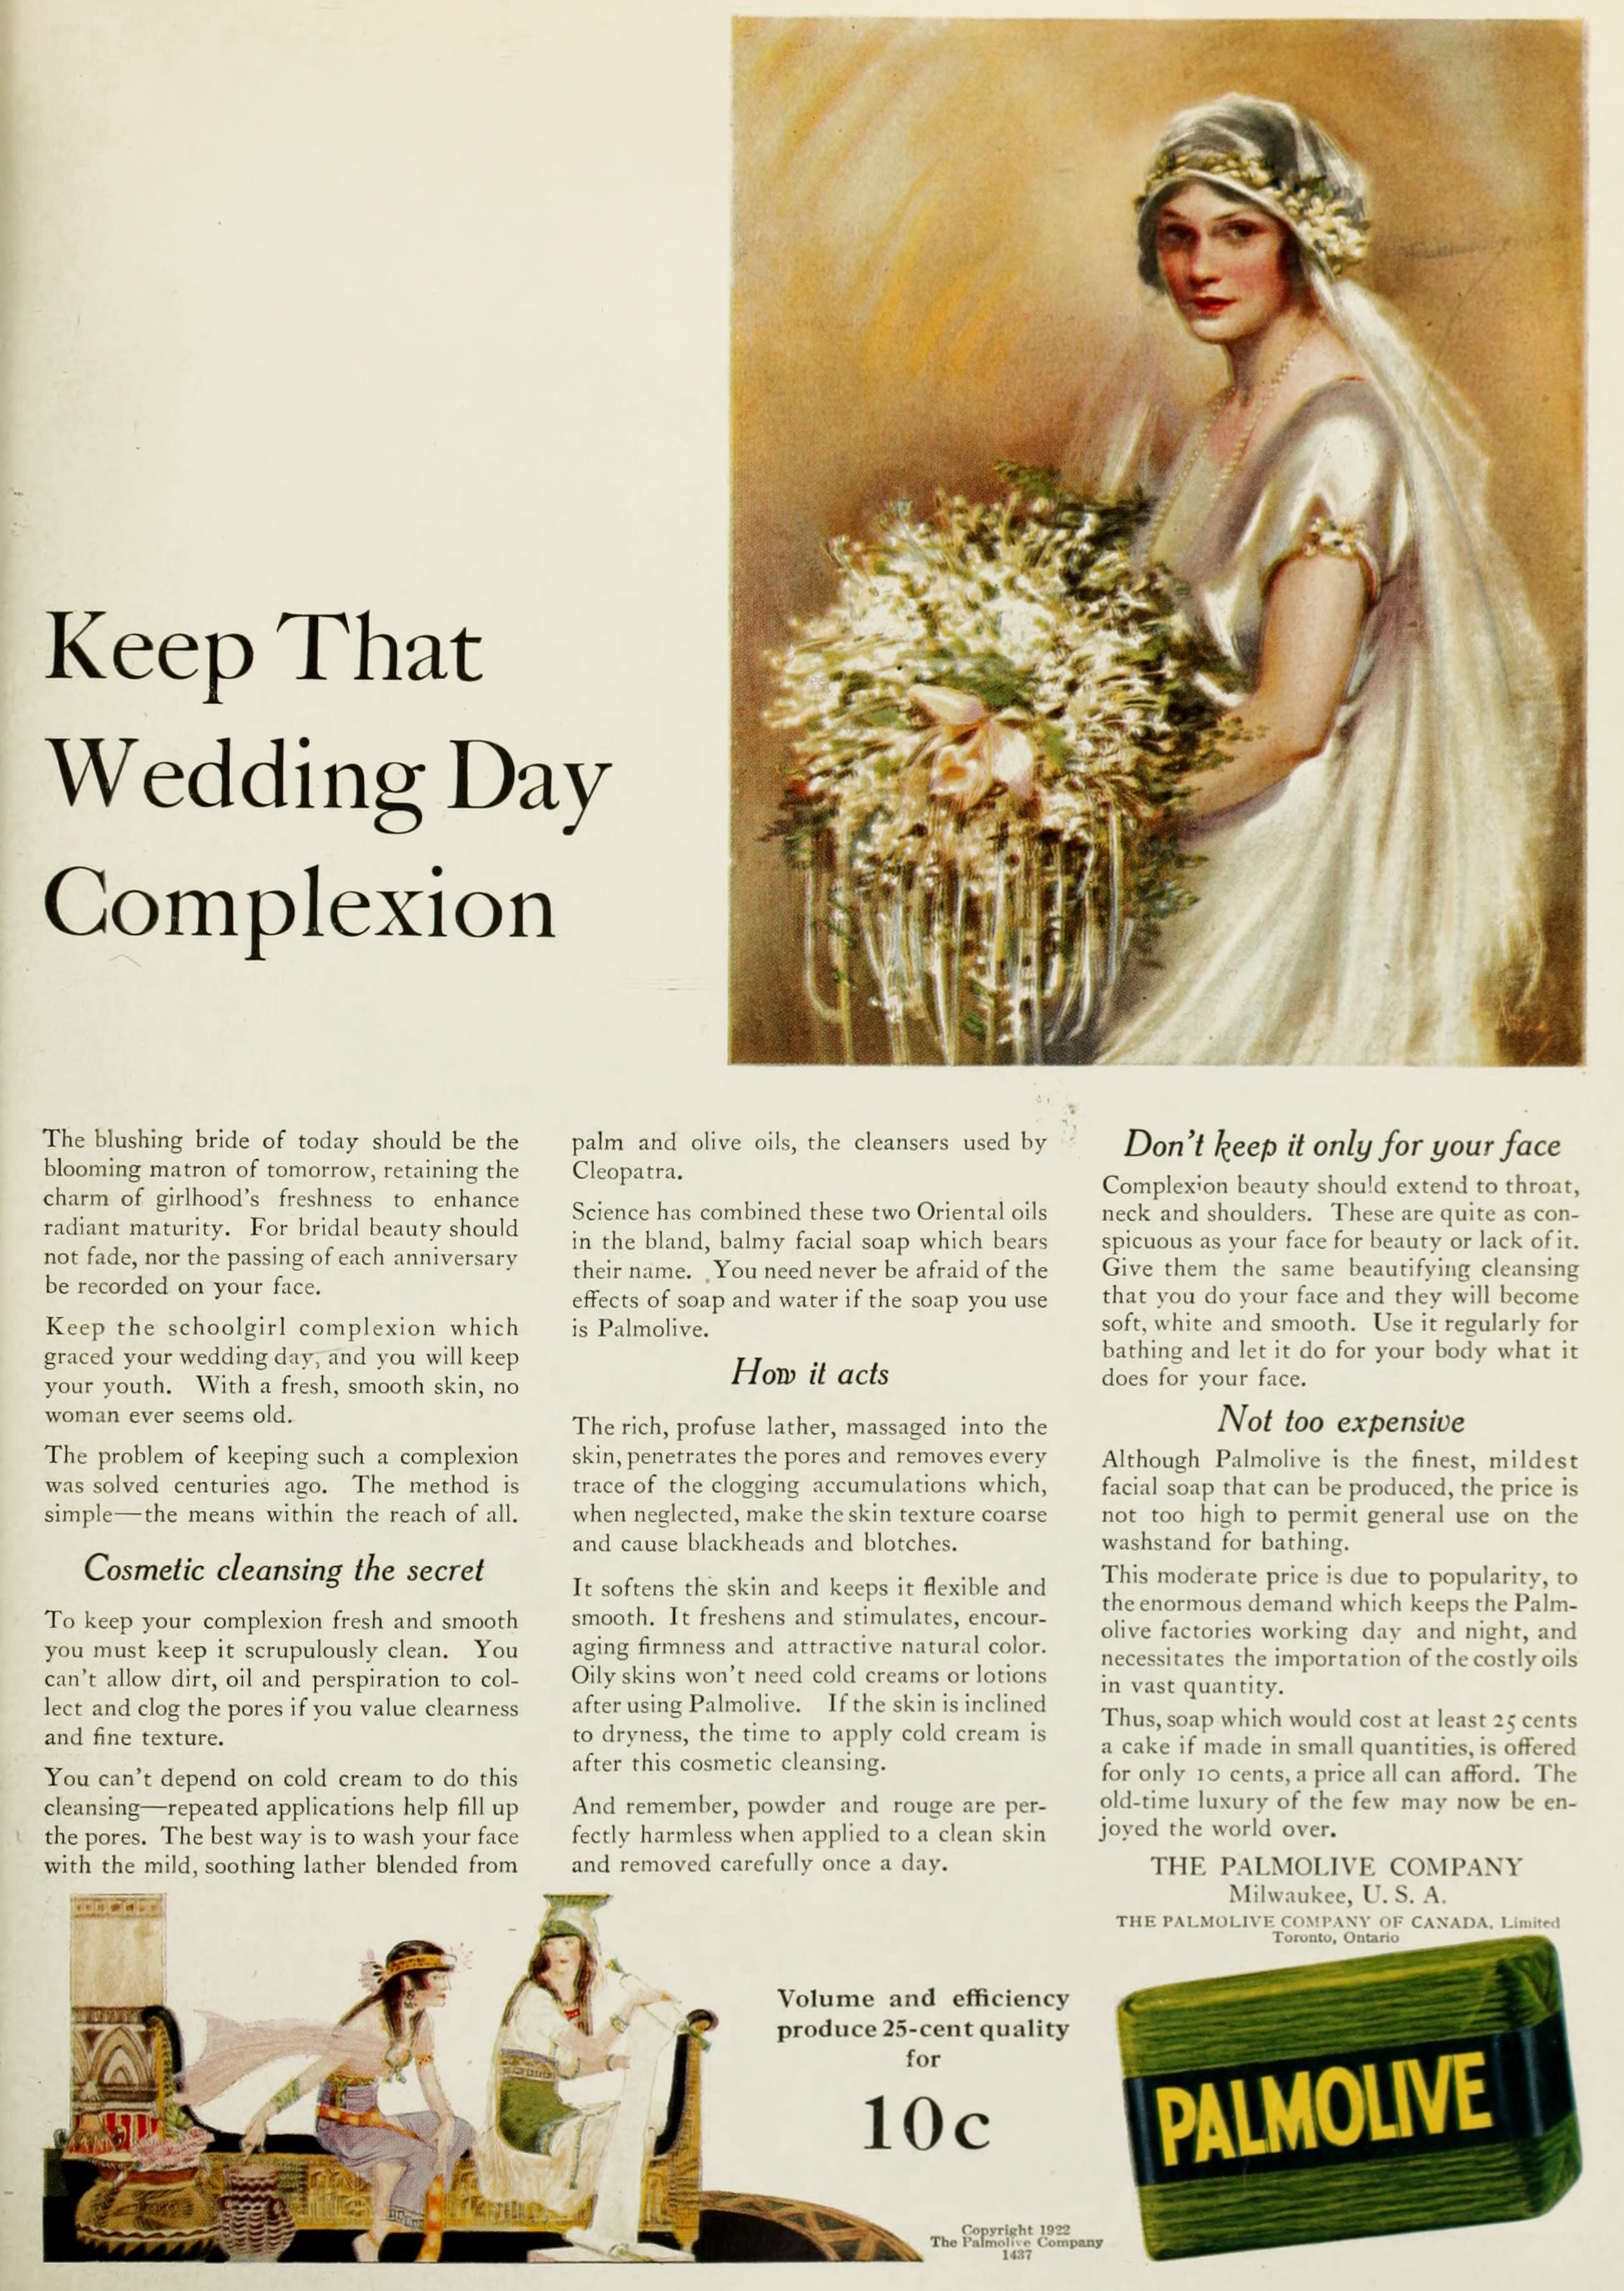 Palmolive Soap Ad Circa 1922 Keep That Wedding Day Complexion